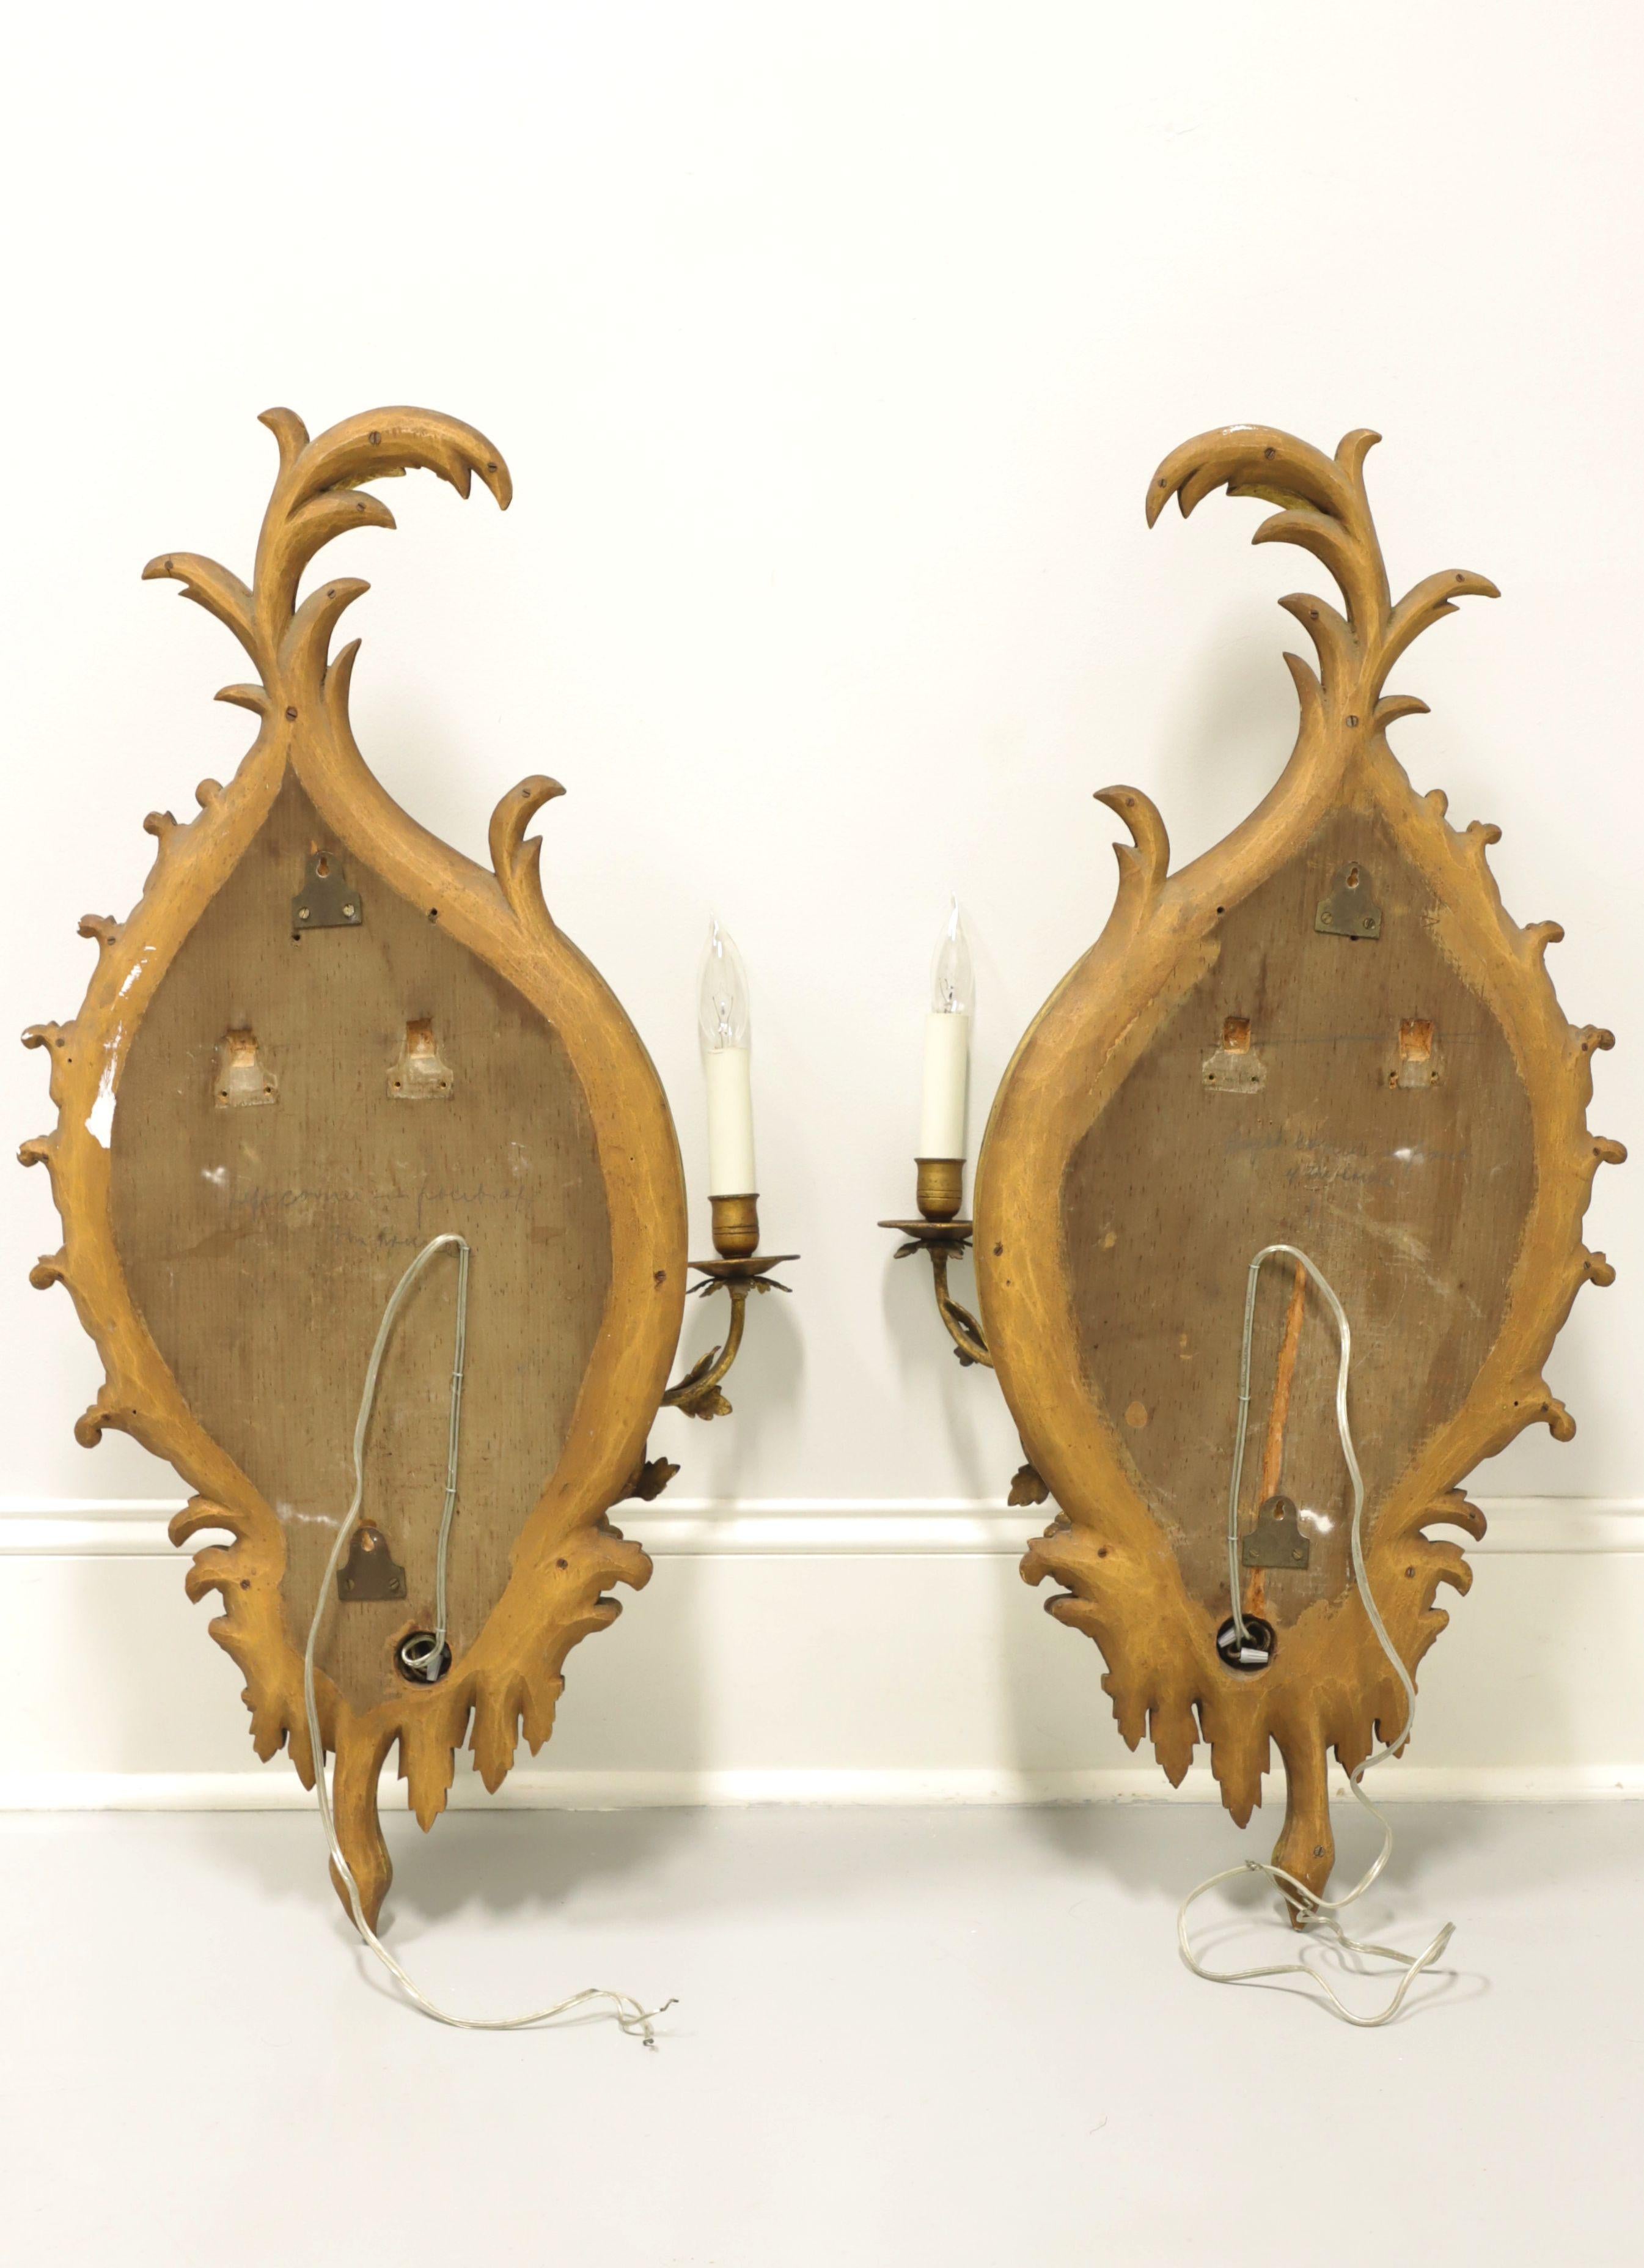 Early 20th Century Carved Wood Electrified Candle Mirror Wall Sconces - Pair A 2